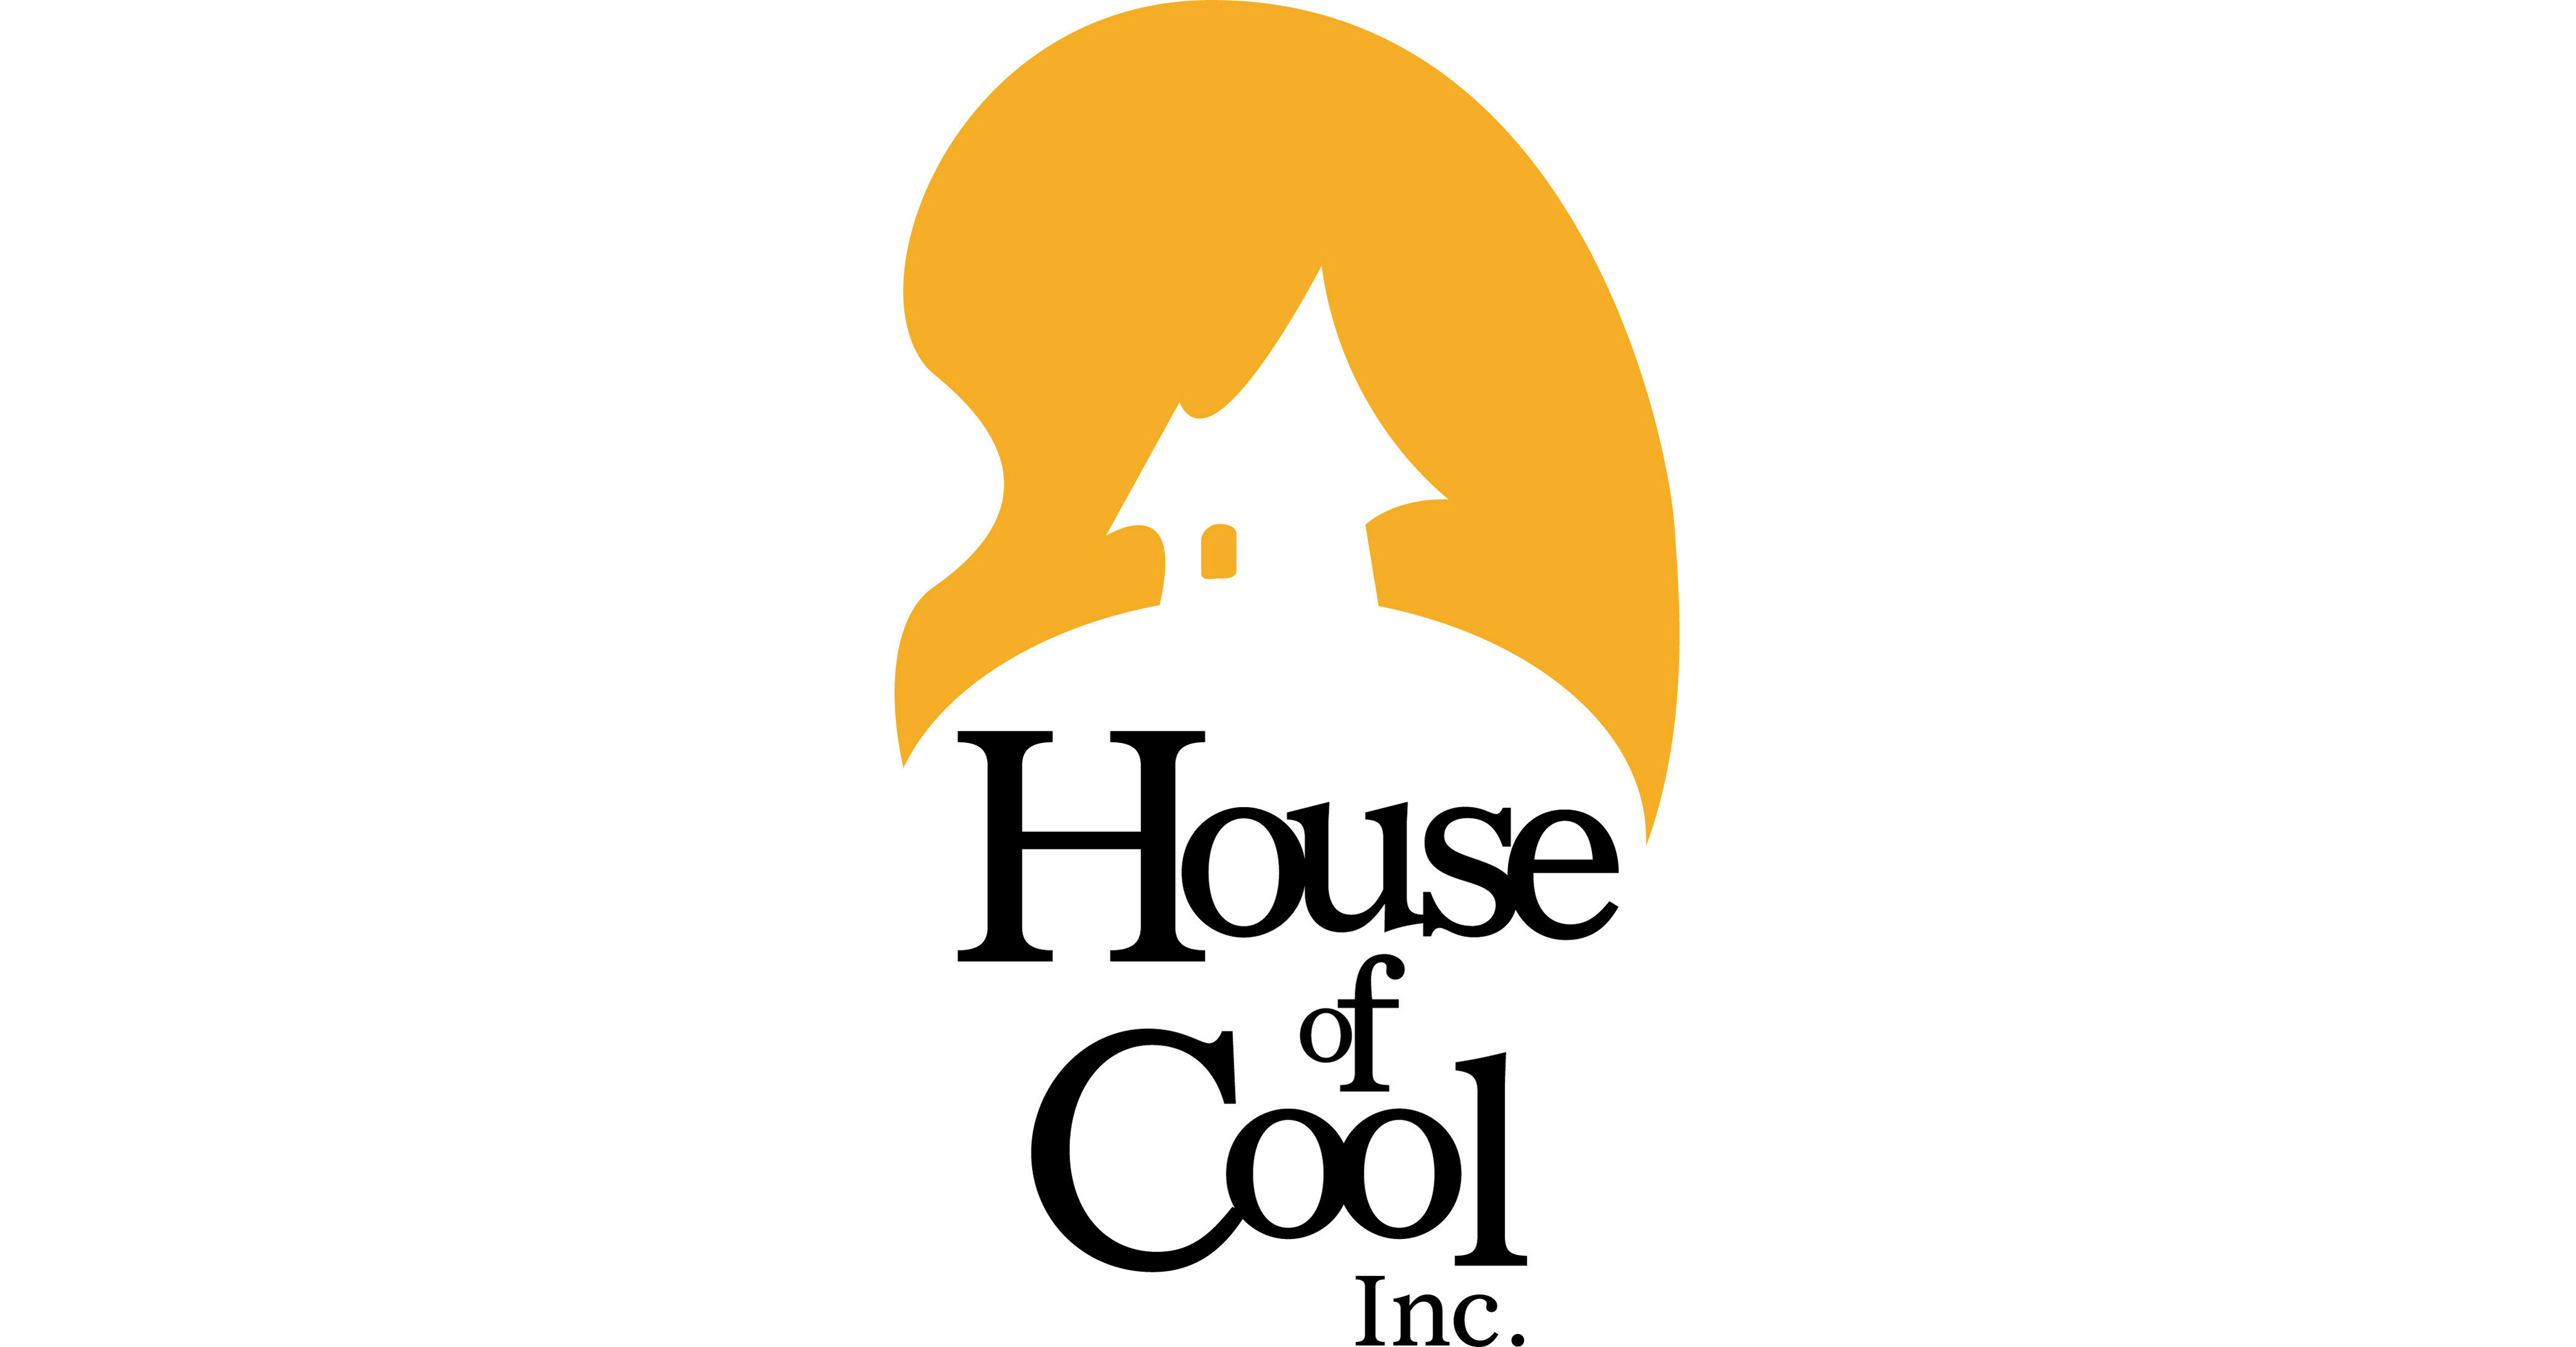 Series - House of Cool